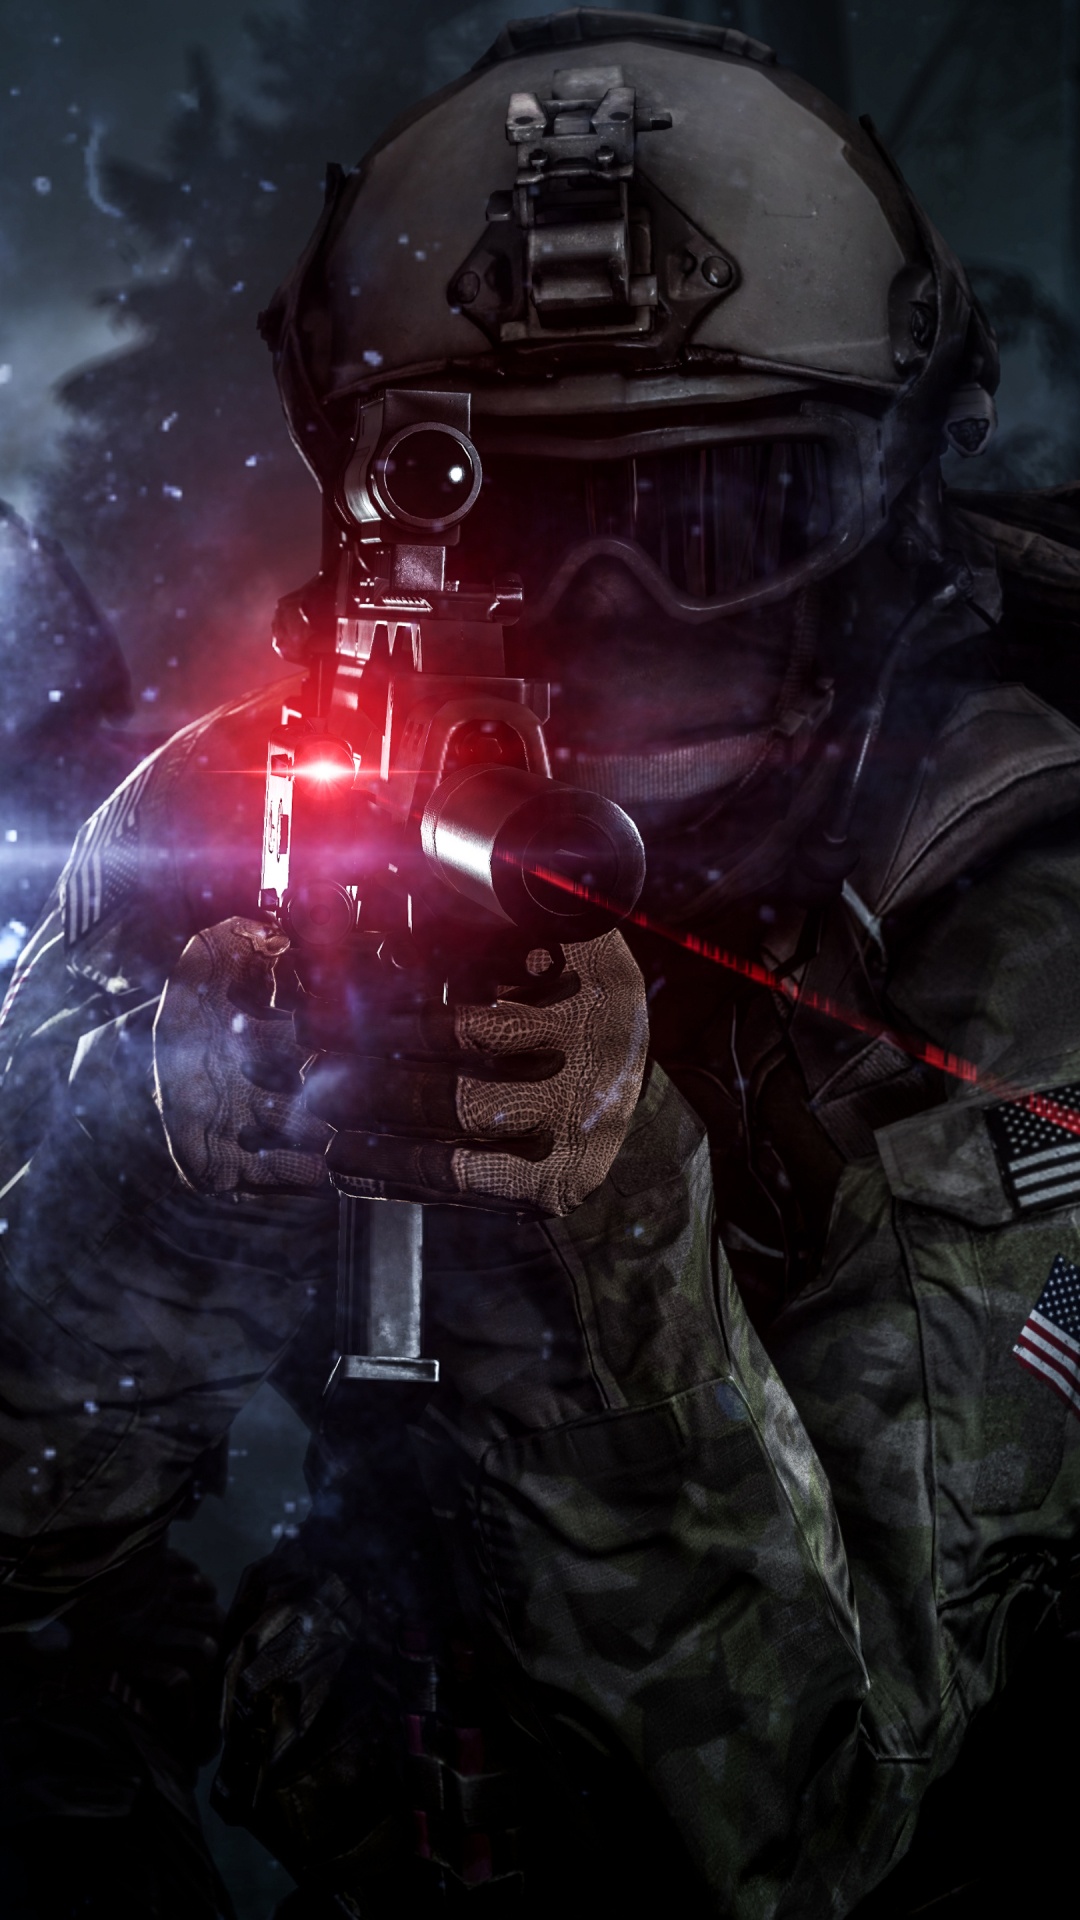 Jeu Pc, Obscurité, Espace, Android, Battlefield 4. Wallpaper in 1080x1920 Resolution